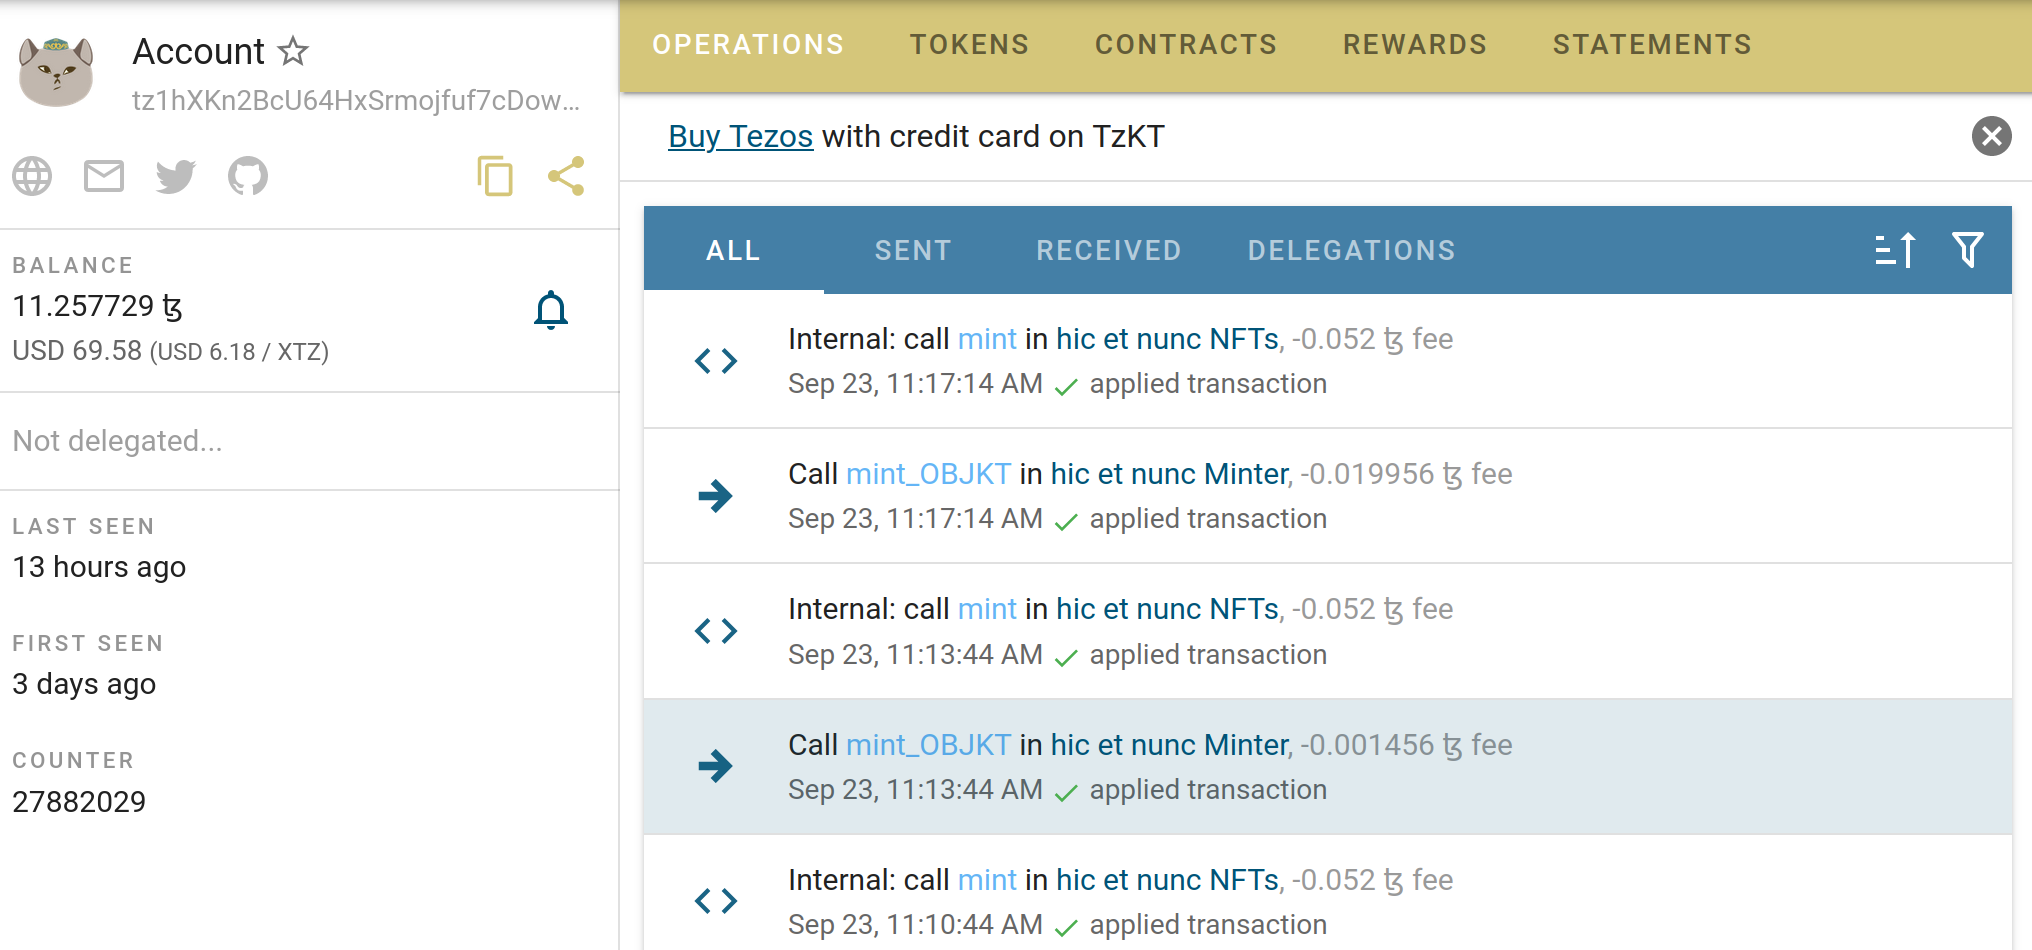 How to Mint Crypto Art For (Almost) Free on Hic et Nunc on Tezos, Free  Comprehensive NFT Minting Guide on H=N